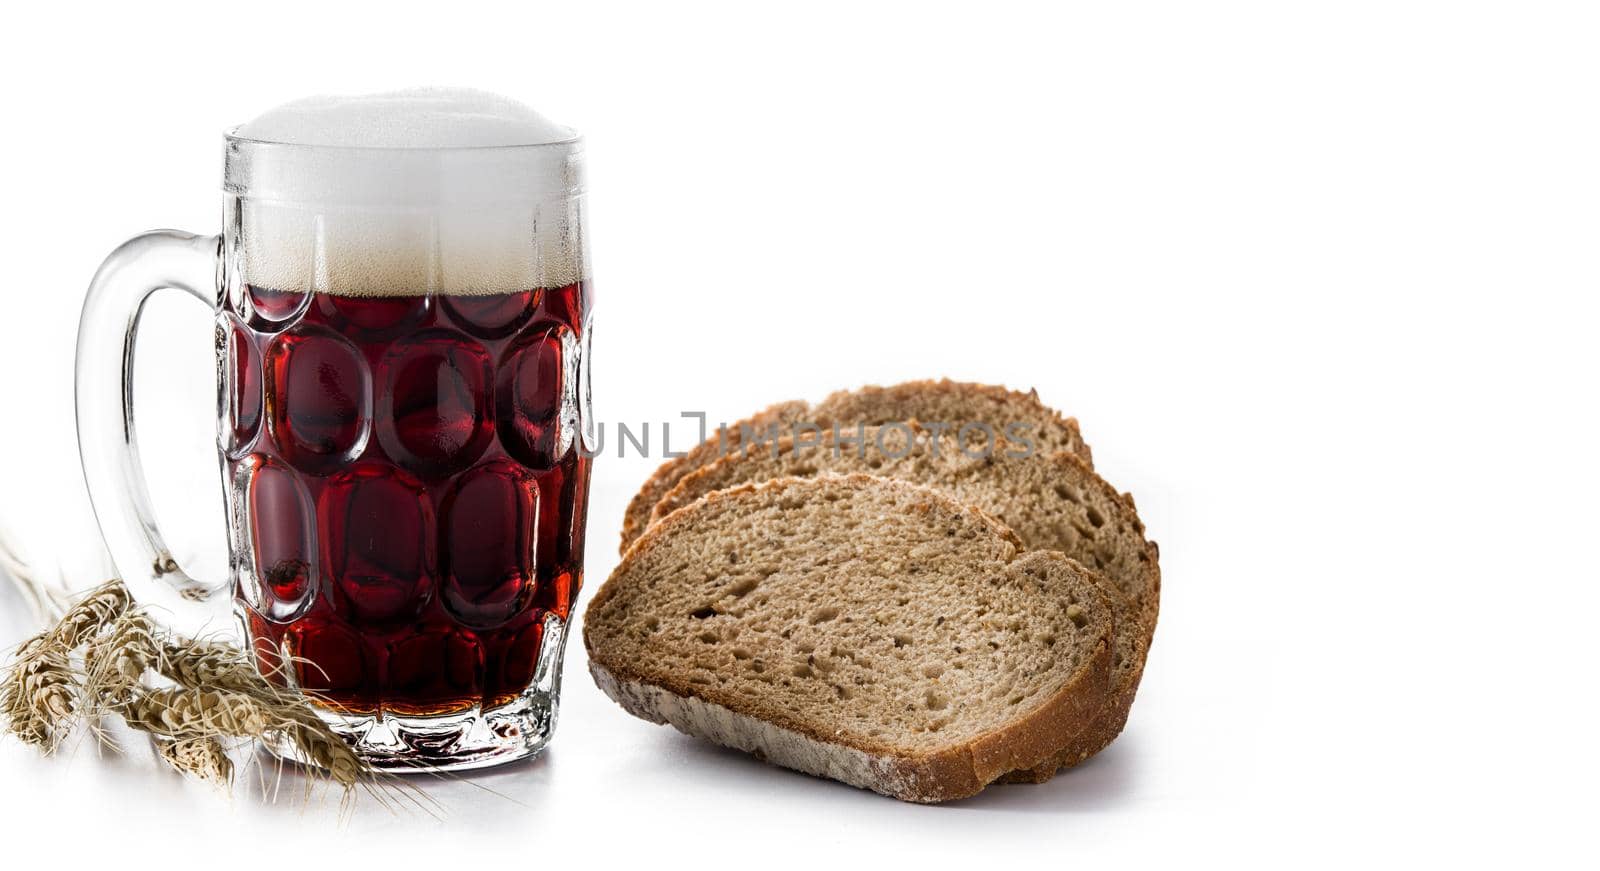 Traditional kvass beer mug with rye bread  by chandlervid85